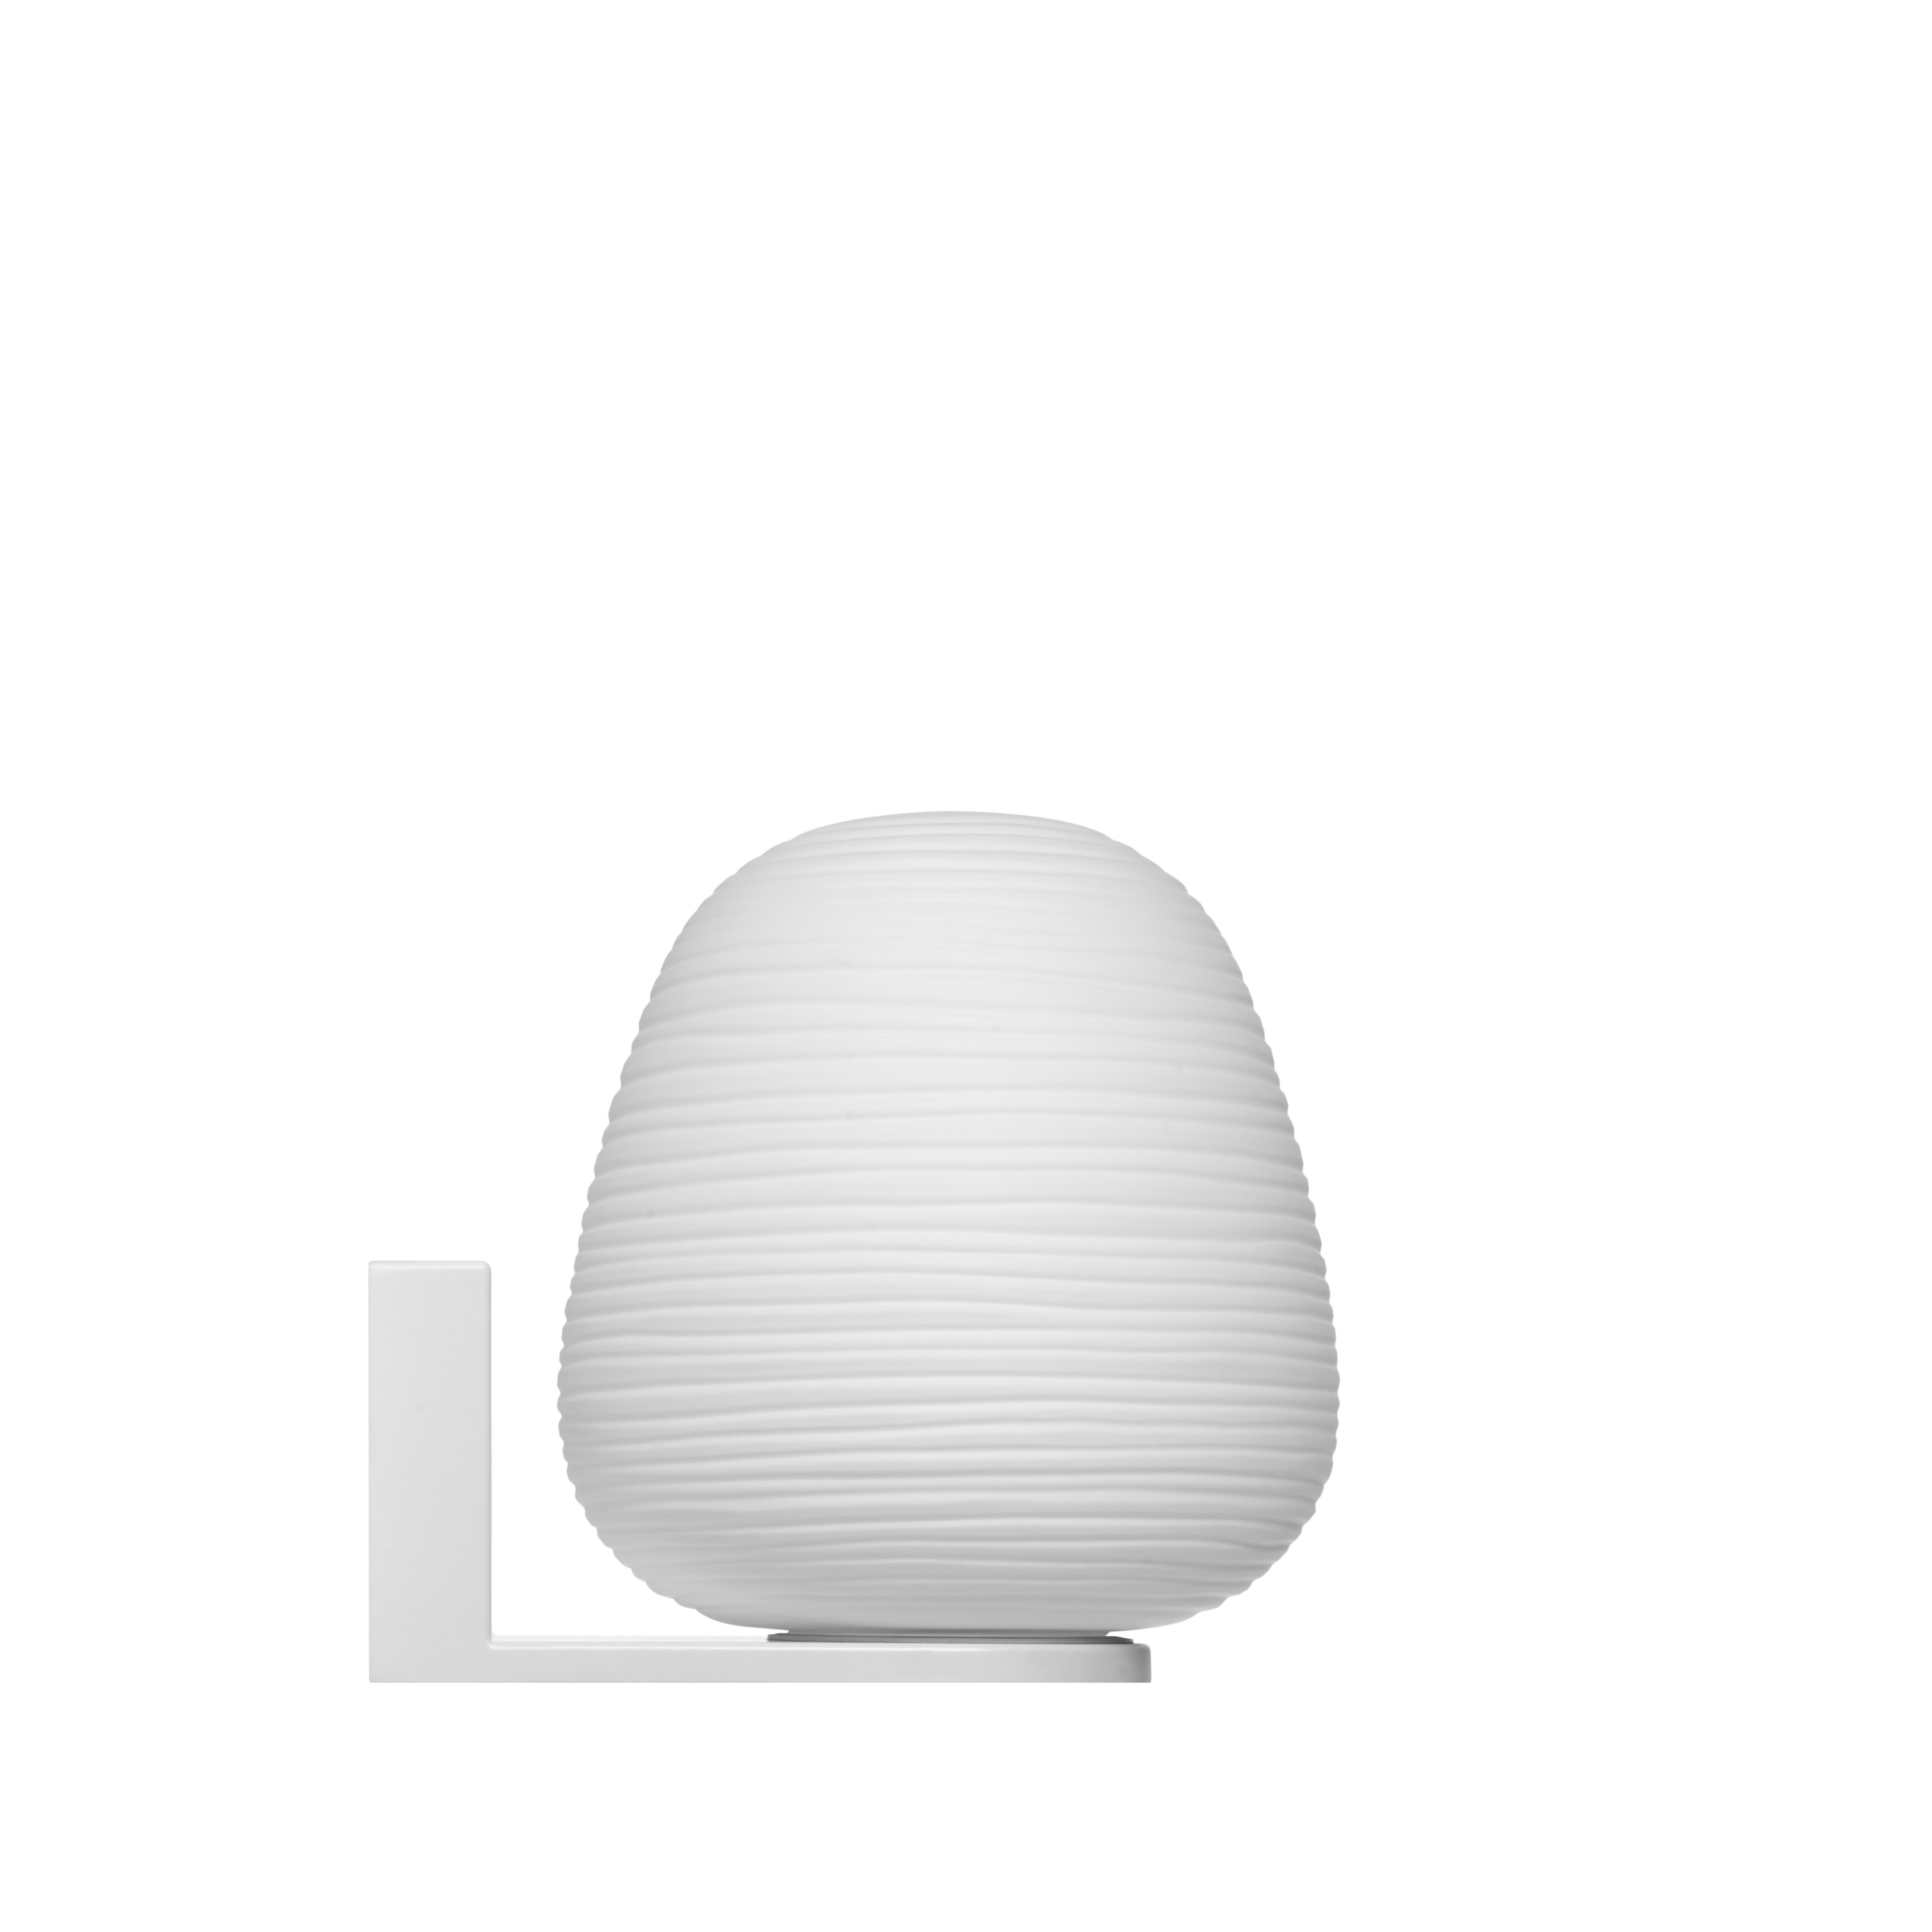 Foscarini Rituals 3 Wall Lamp in White by Ludovica and Roberto Palomba For Sale